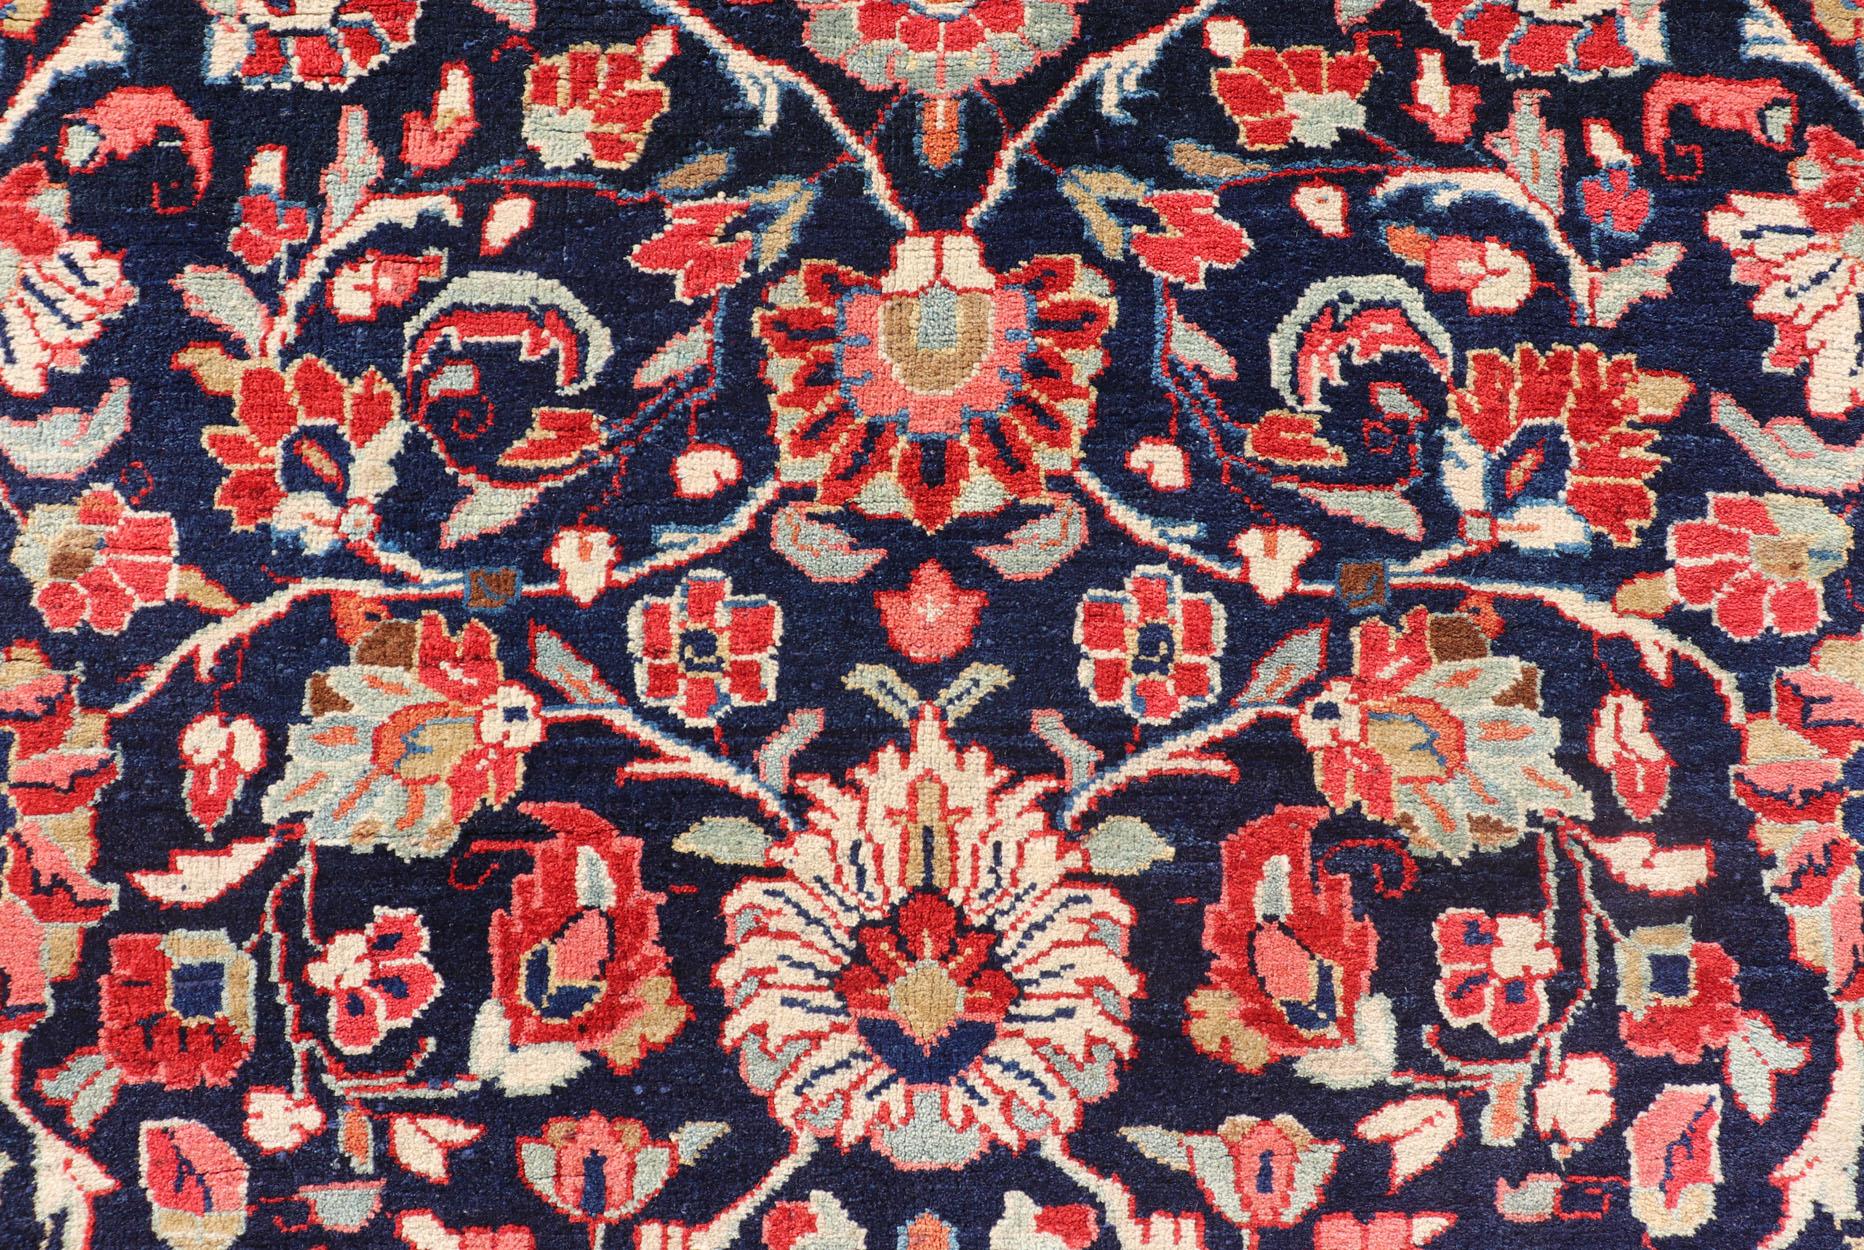 Antique Persian Gallery Runner with Floral Design in D. Blue & Jewel Tones In Excellent Condition For Sale In Atlanta, GA